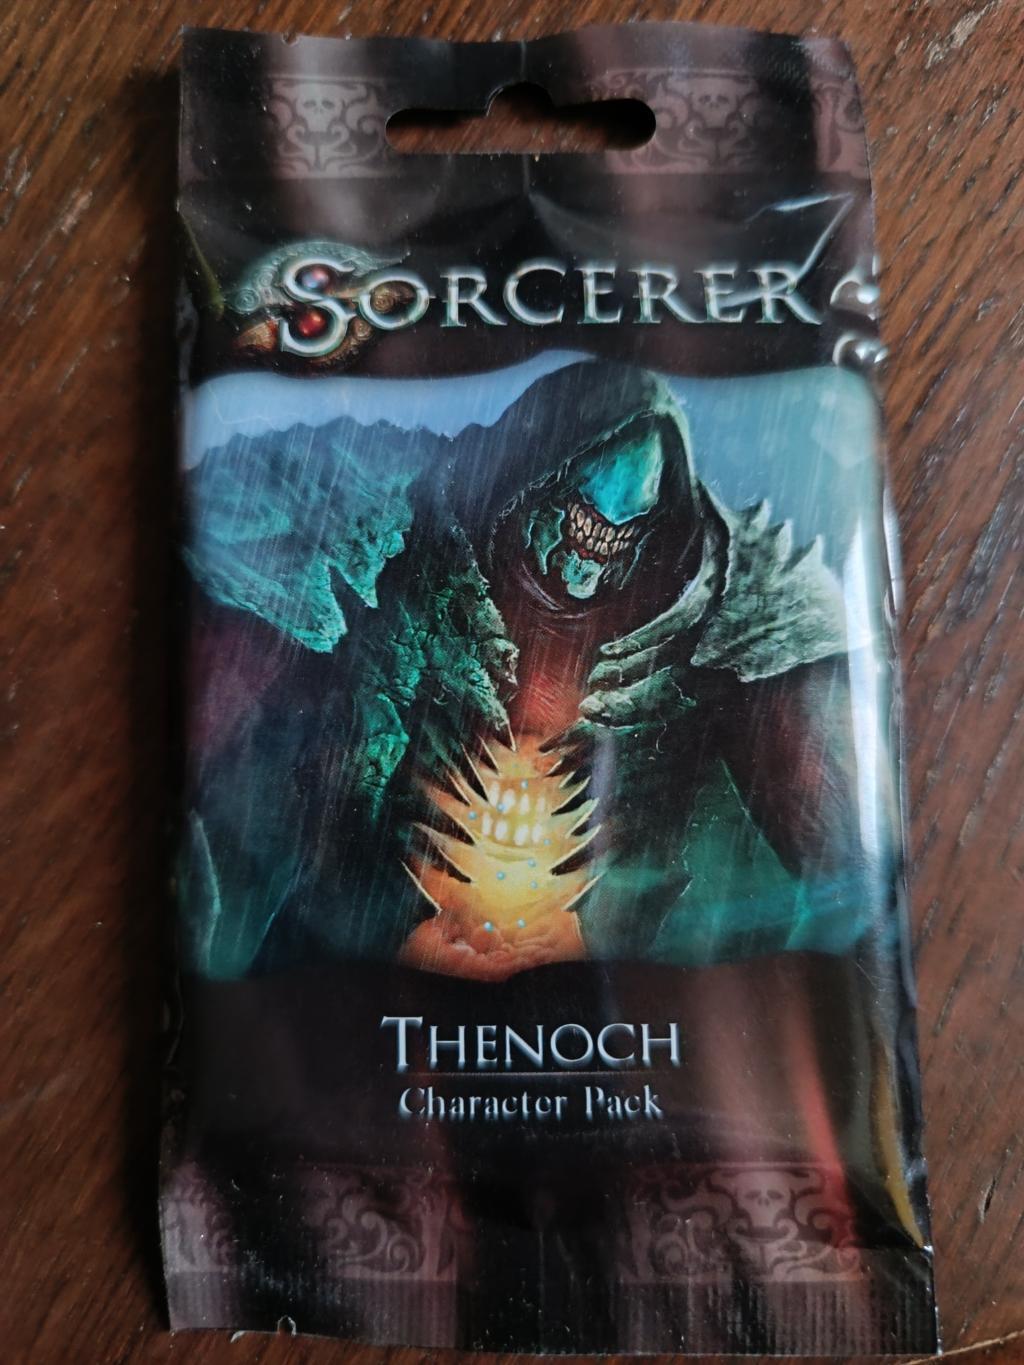 Sorcerer - Thenoch Character Pack